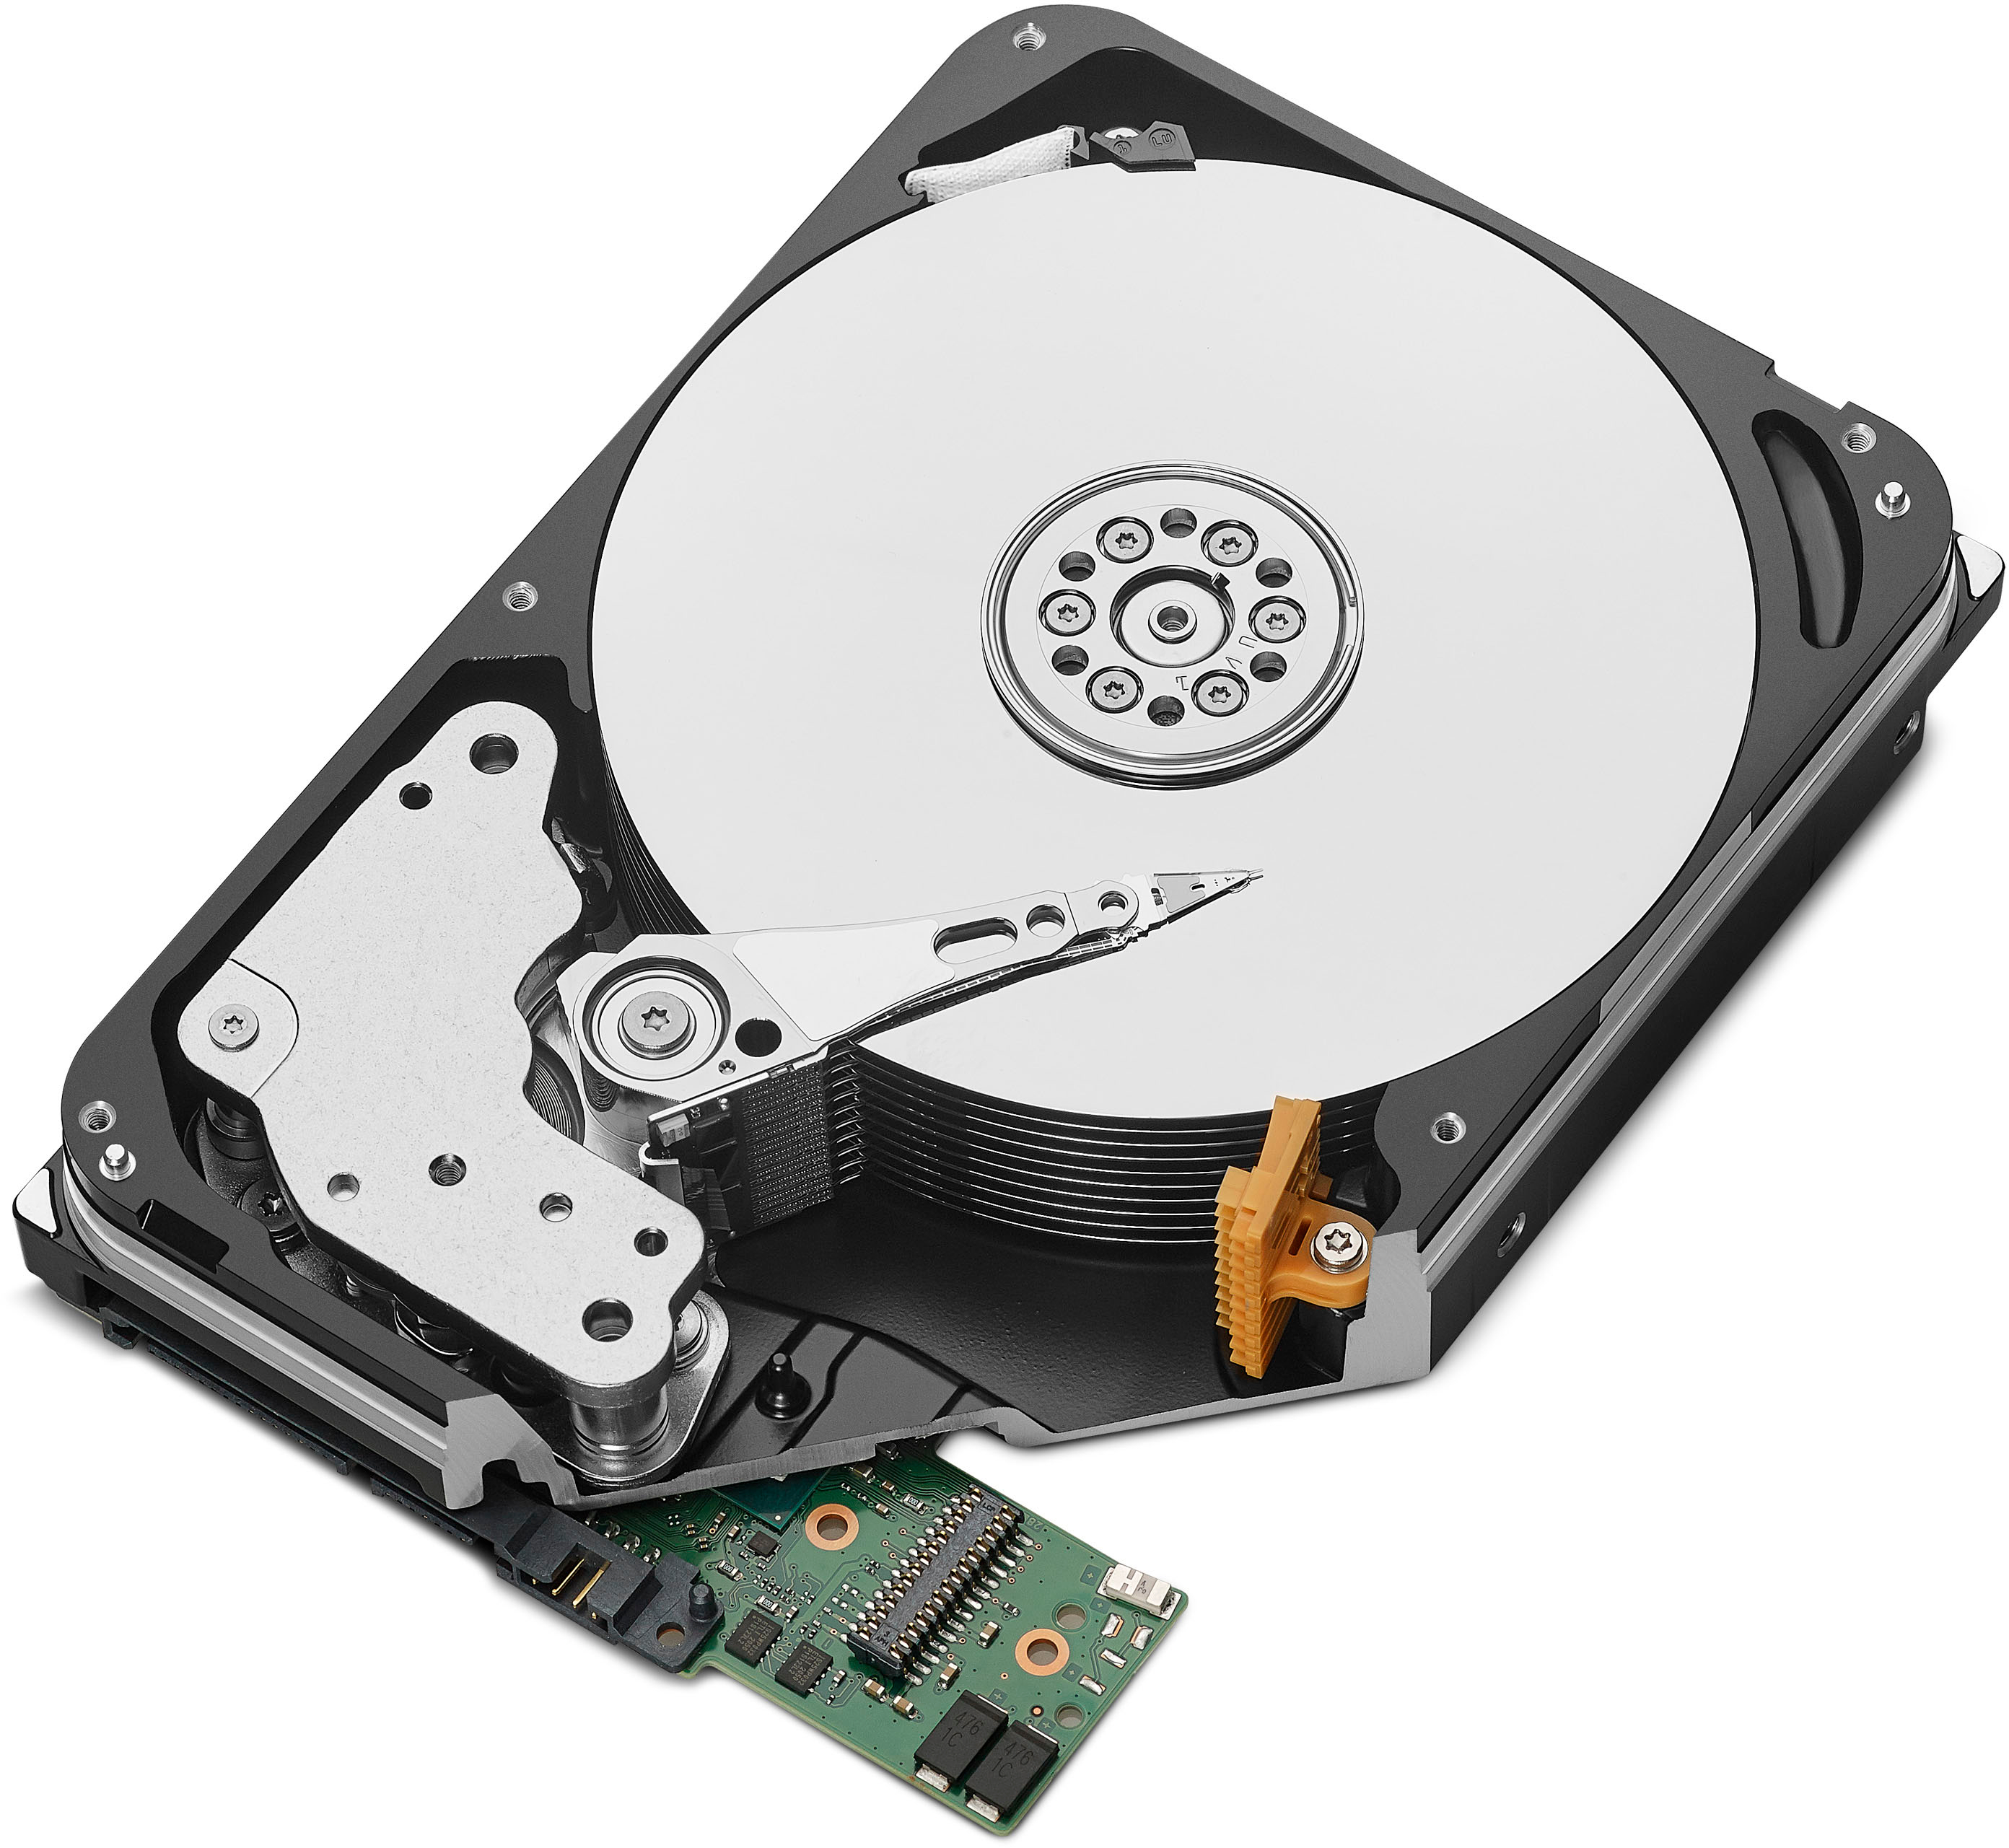 New Seagate Ironwolf Pro NAS Hard Drives – Say Hello to the NT